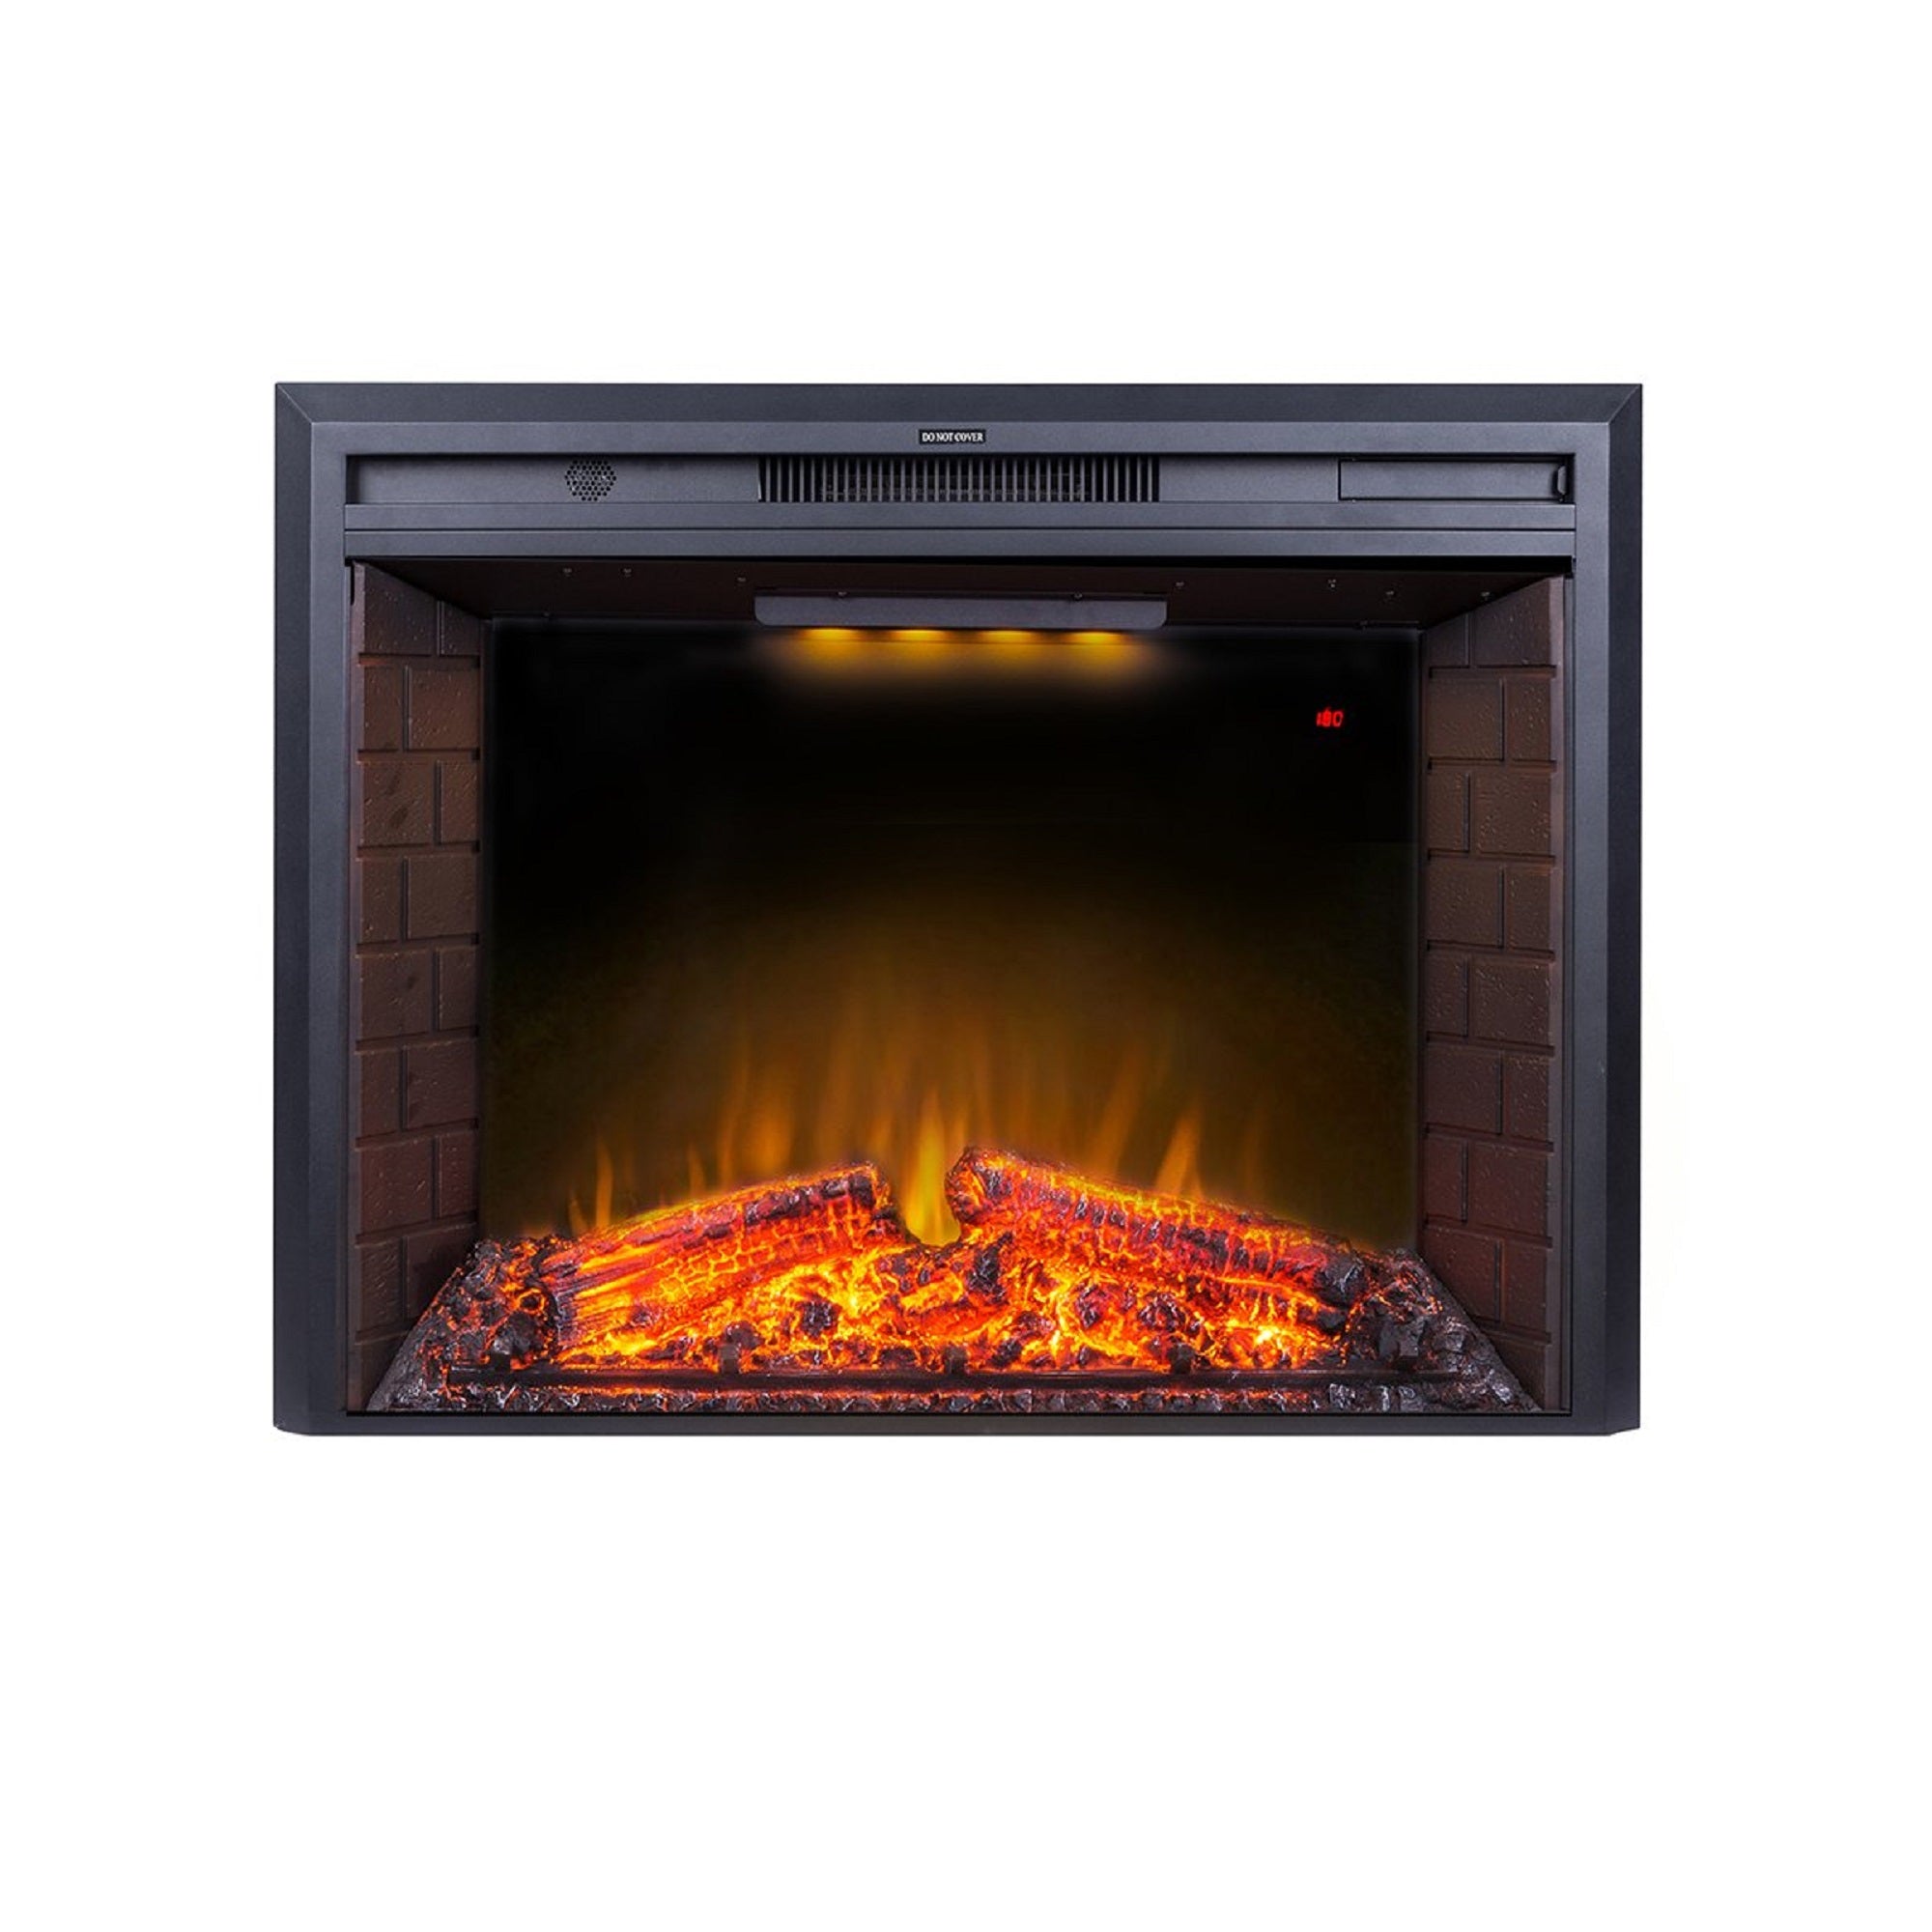 36 Inches Electric Fireplace Insert, Fireplace Heater with Overheating Protection, Black-Boyel Living